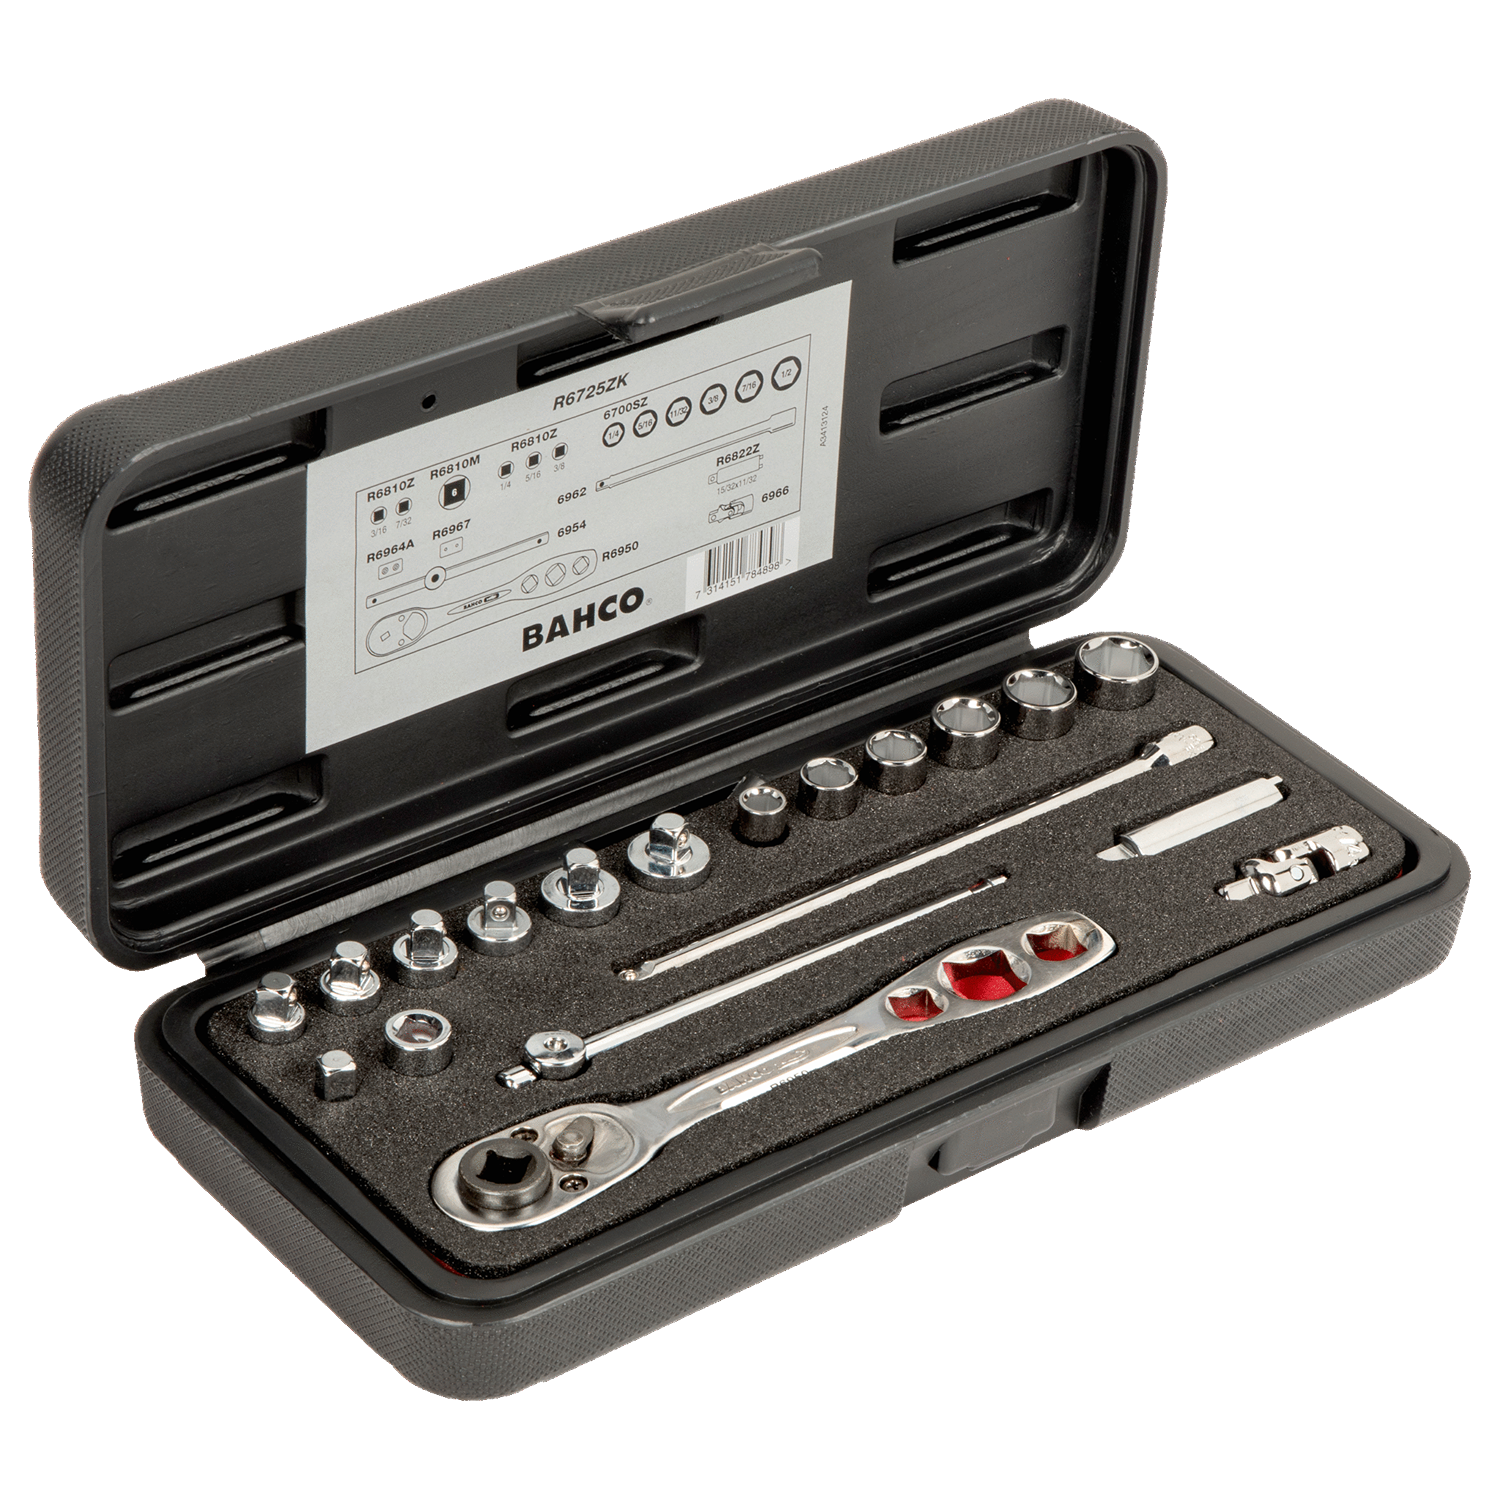 BAHCO R6725ZK 1/4” Square Drive Socket Set Refrigeration - Premium Socket Set from BAHCO - Shop now at Yew Aik.